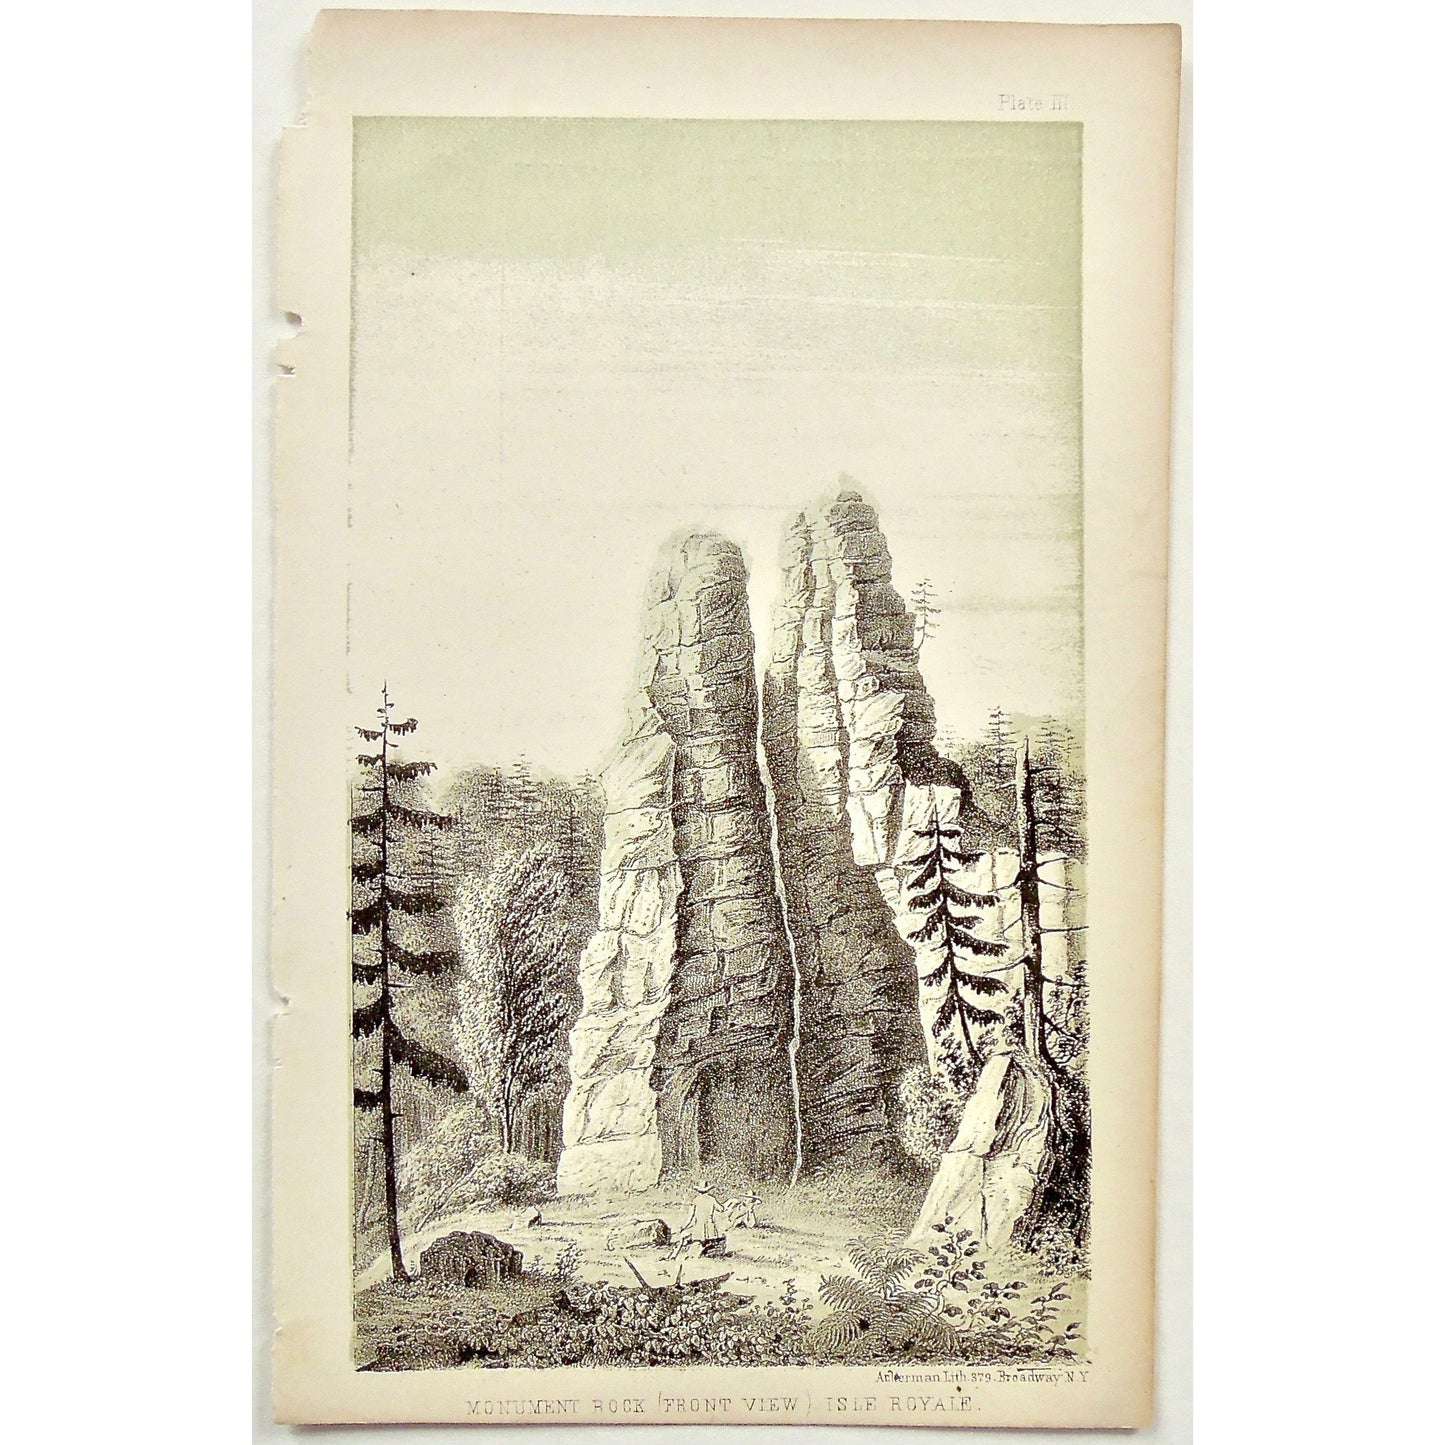 Monument Rock, Front View, Front, view, Isle Royale, Isle, Royale, Monument, Rock, rock formation, lounging, relaxing, admiring, Landscape, Lake Superior, Lake, Superior, National Lakeshore, Lakeshore, Michigan, MI, Ackerman, 379 Broadway, Foster, Whitney, House of Representatives, House of Reps., Report, Geology, Topography, Land District, State of Michigan, Part II, The Iron Region, General Geology, Washington D.C., Washington, DC, D.C., 1851, lithograph, two-toned, Antique Print, Antique, Prints, Vintage